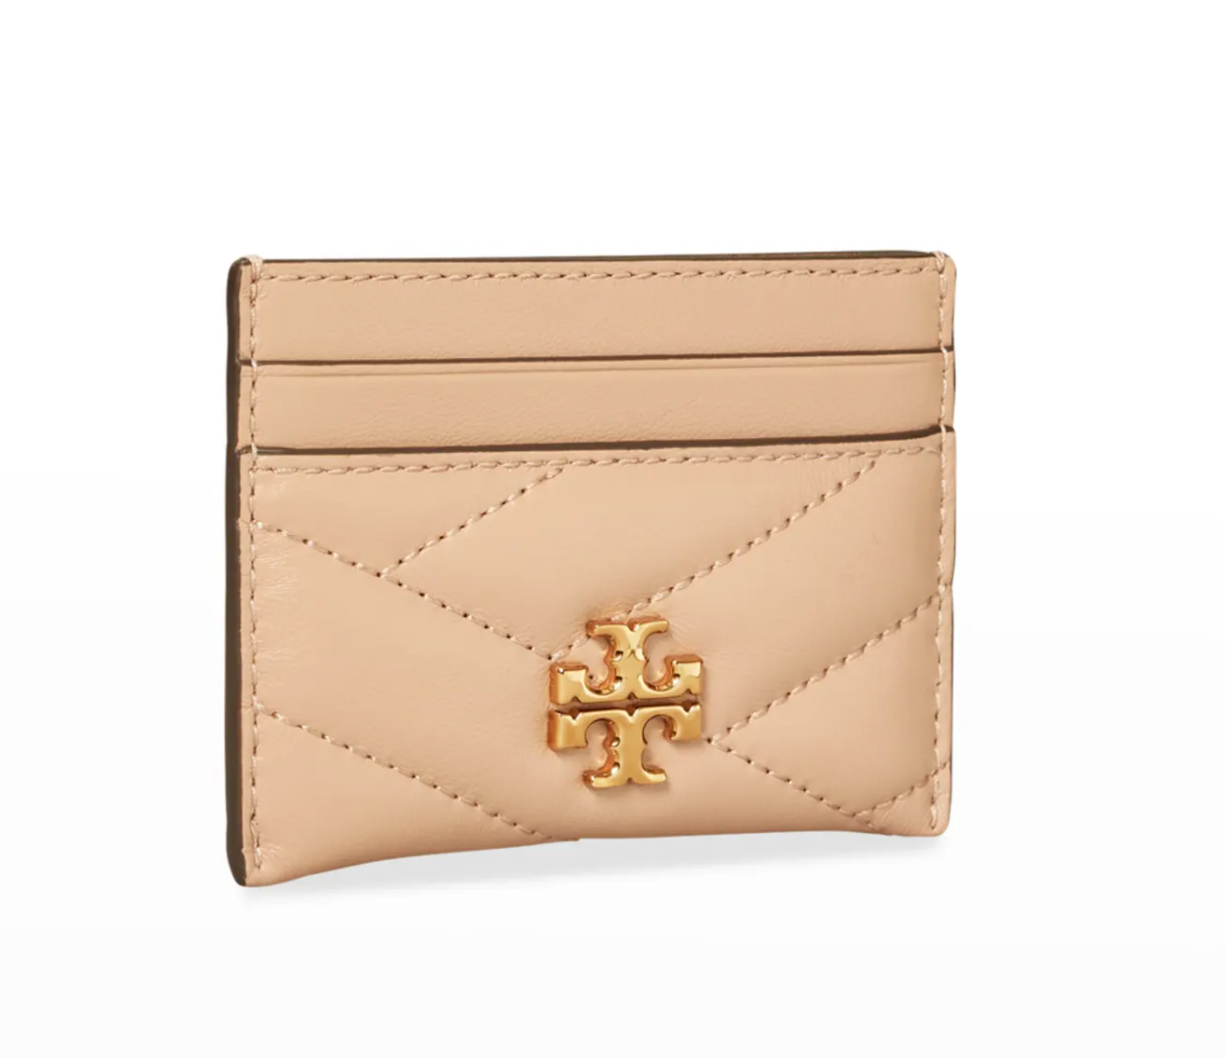 Tory Burch Kira Quilted Leather Card Case in Devon Sand